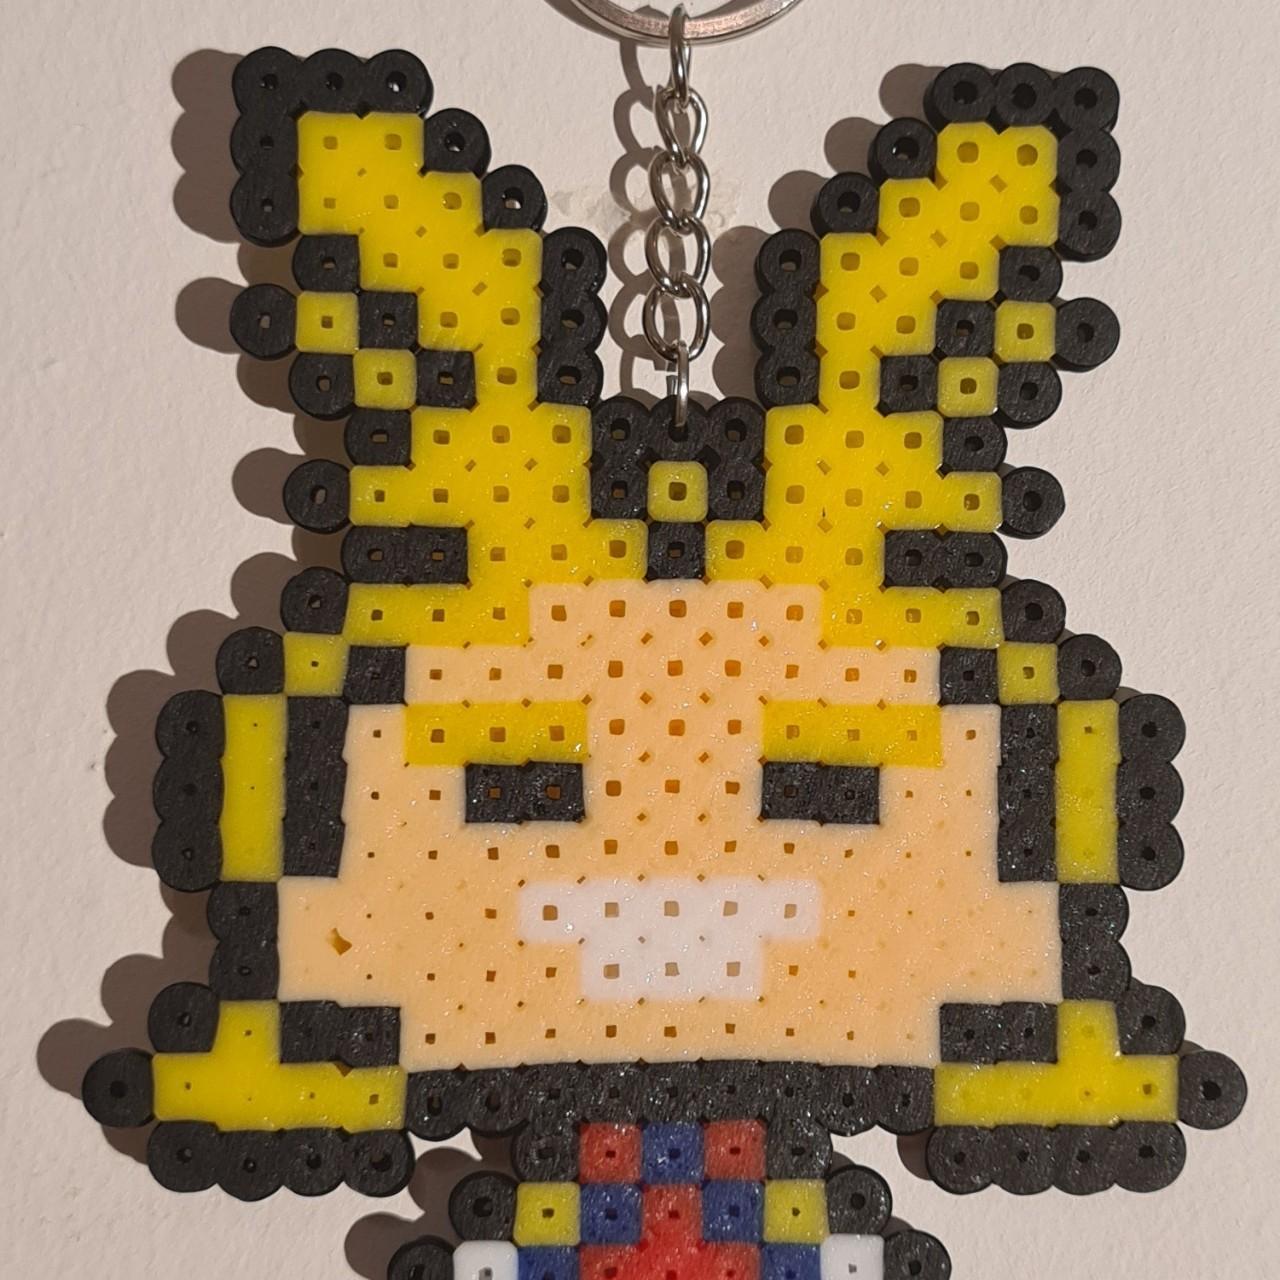 ☆All Might☆ Pixel Art Keychain, ☆anime 》Boku No